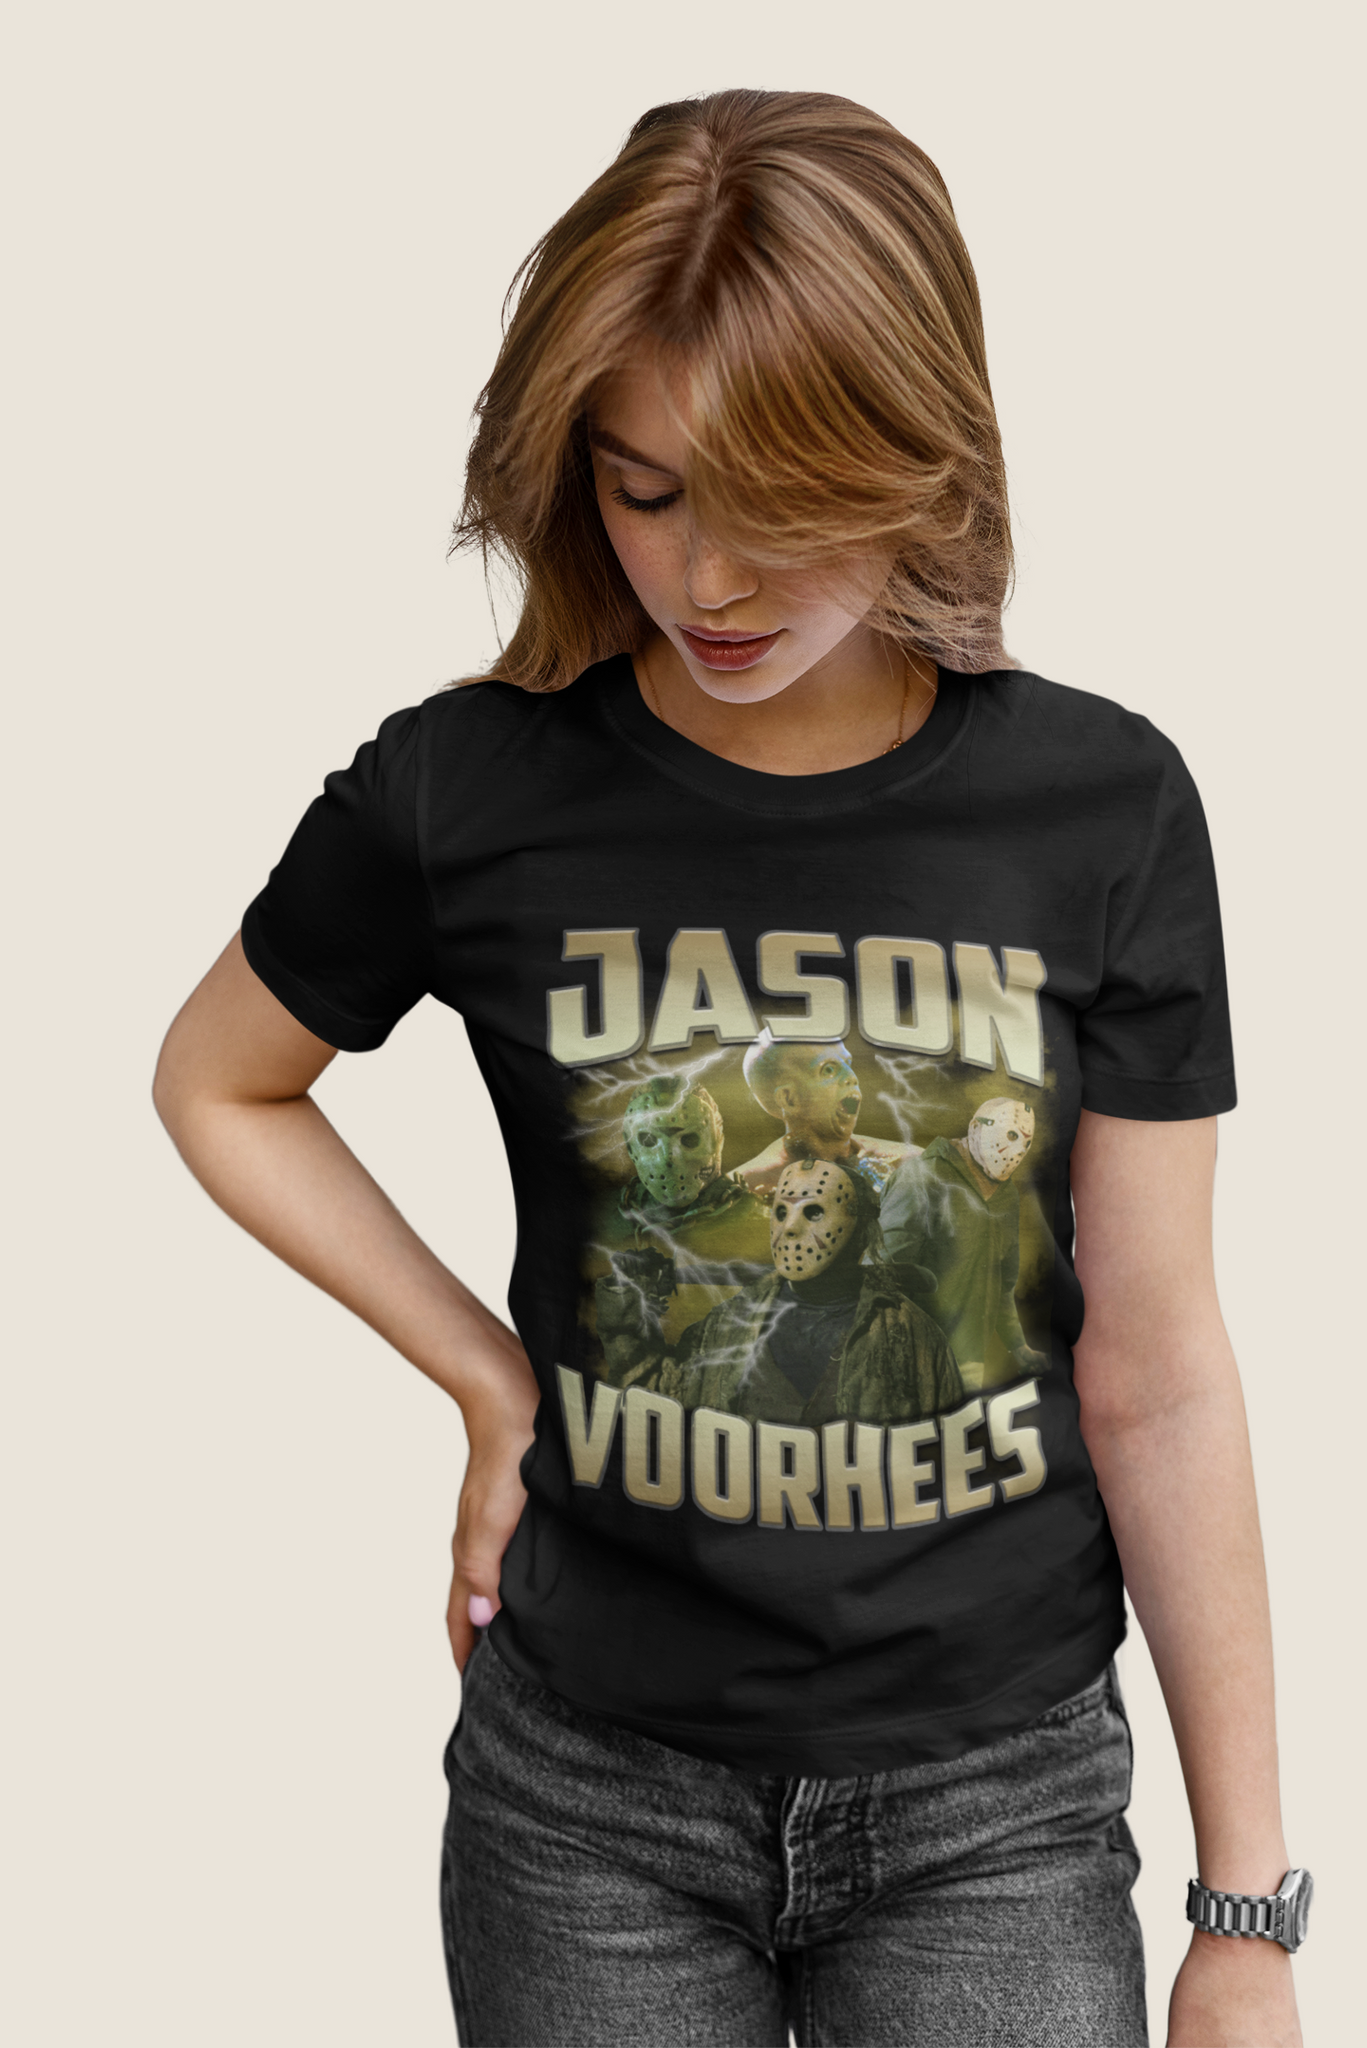 Friday 13th T Shirt, Jason Voorhees Poster Tshirt, Halloween Gifts